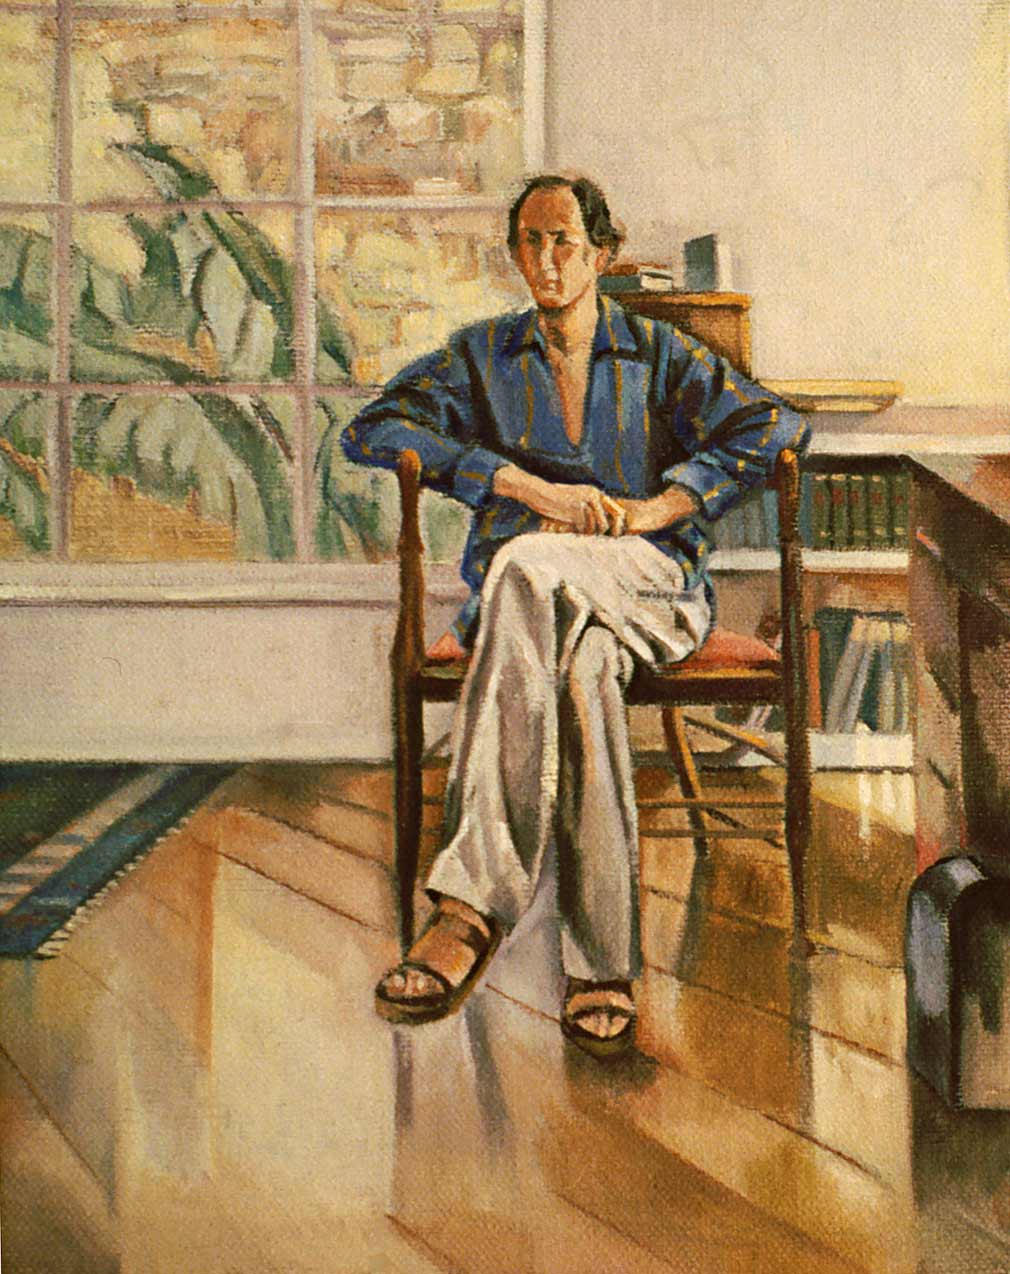 Thumbnail of Peter Maris Architect: figure painting by Ethel Fisher, 1978, oil on canvas, 10 x 8 inches, mid-twentieth century painting.